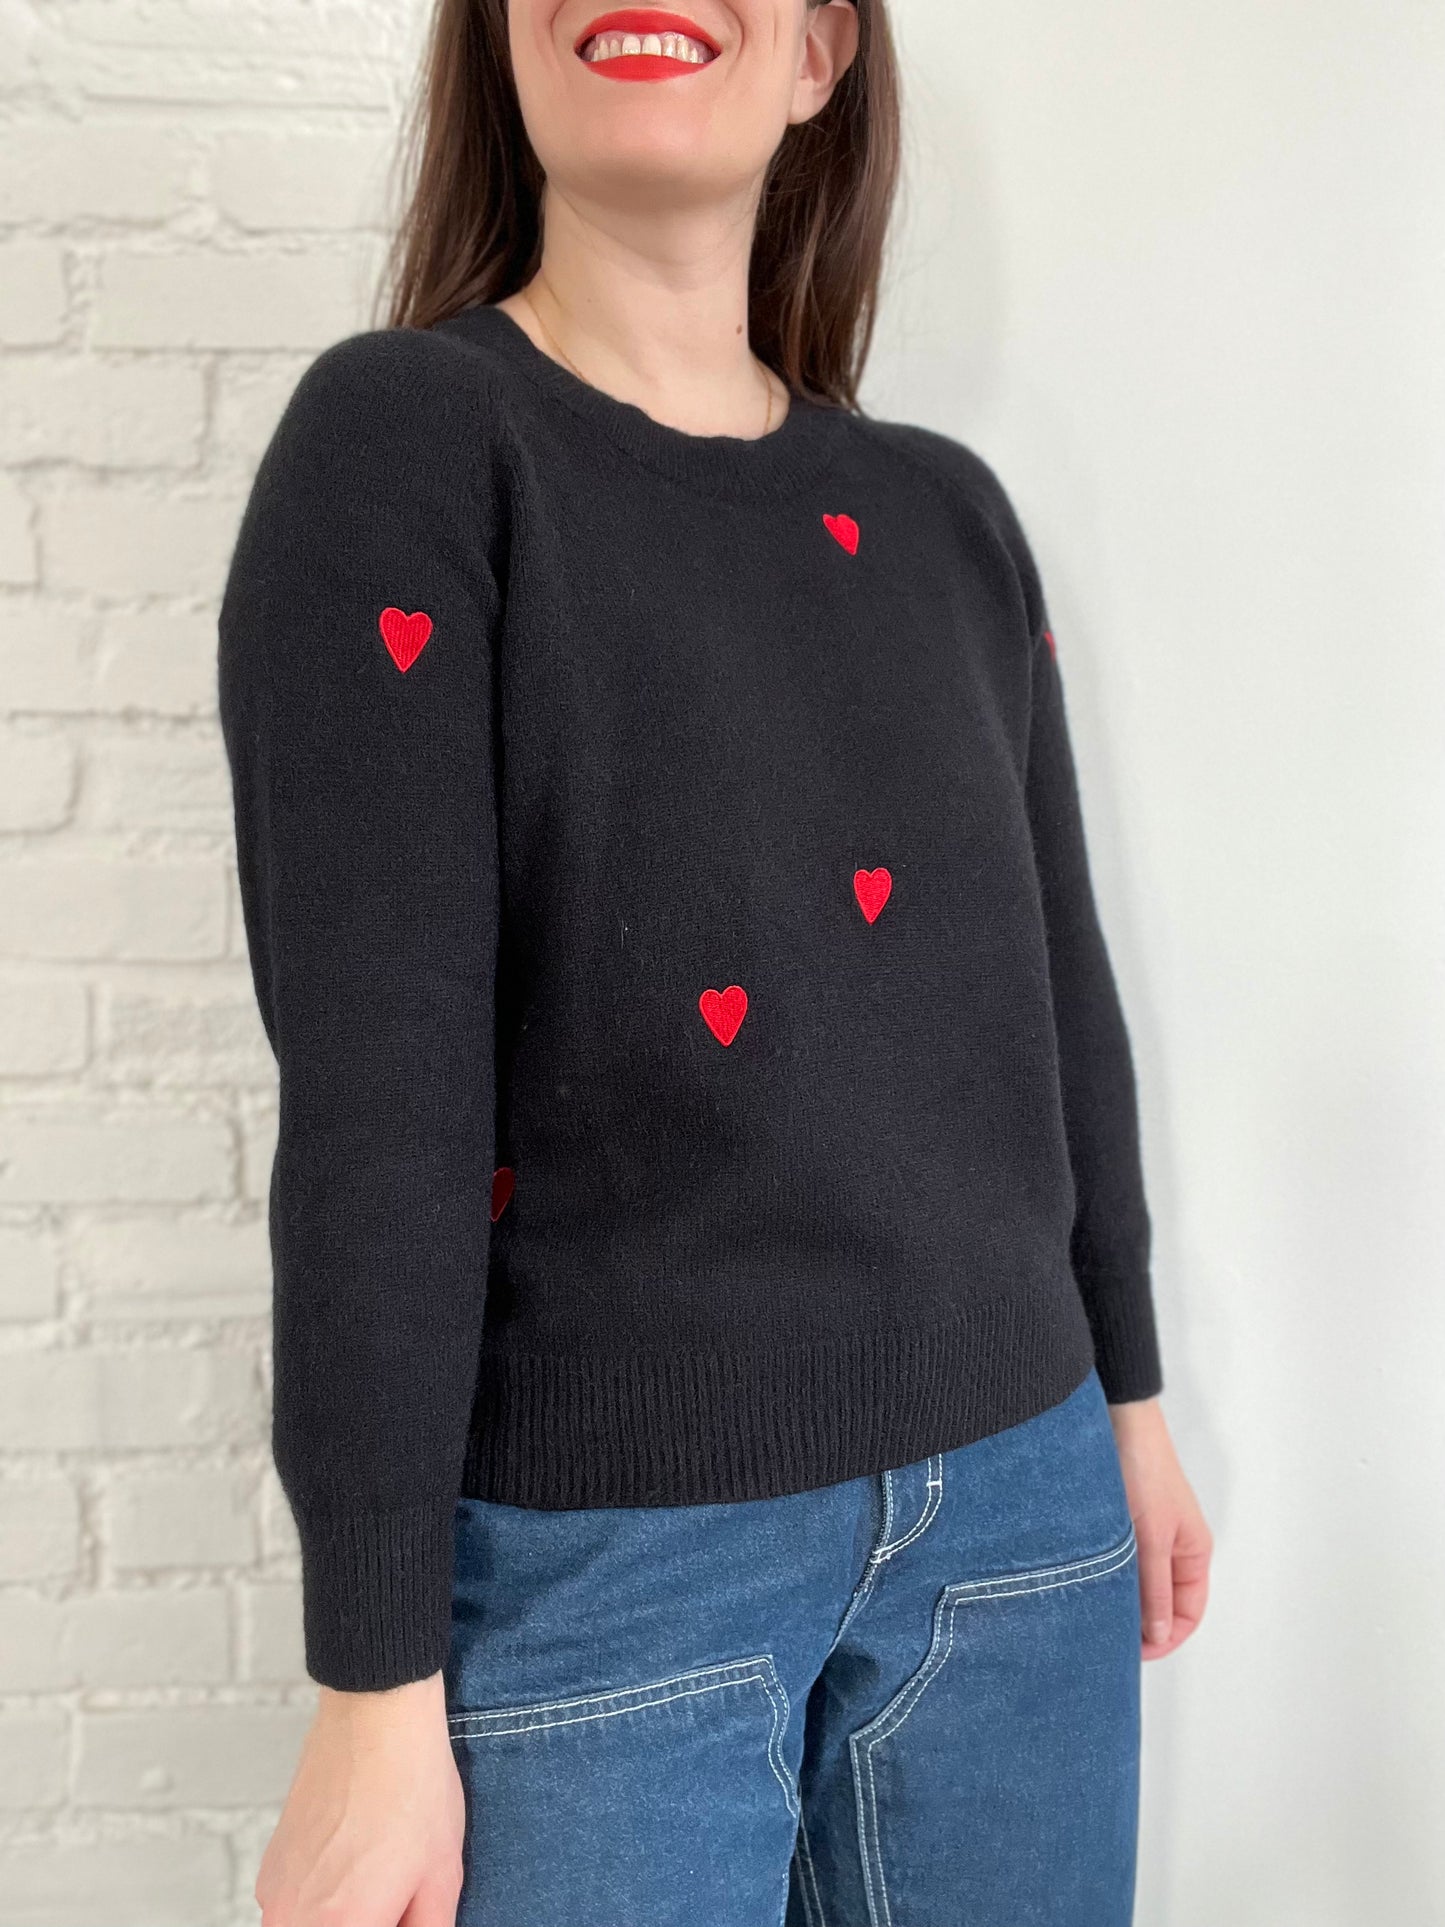 Black and Red Hearts Sweater - M